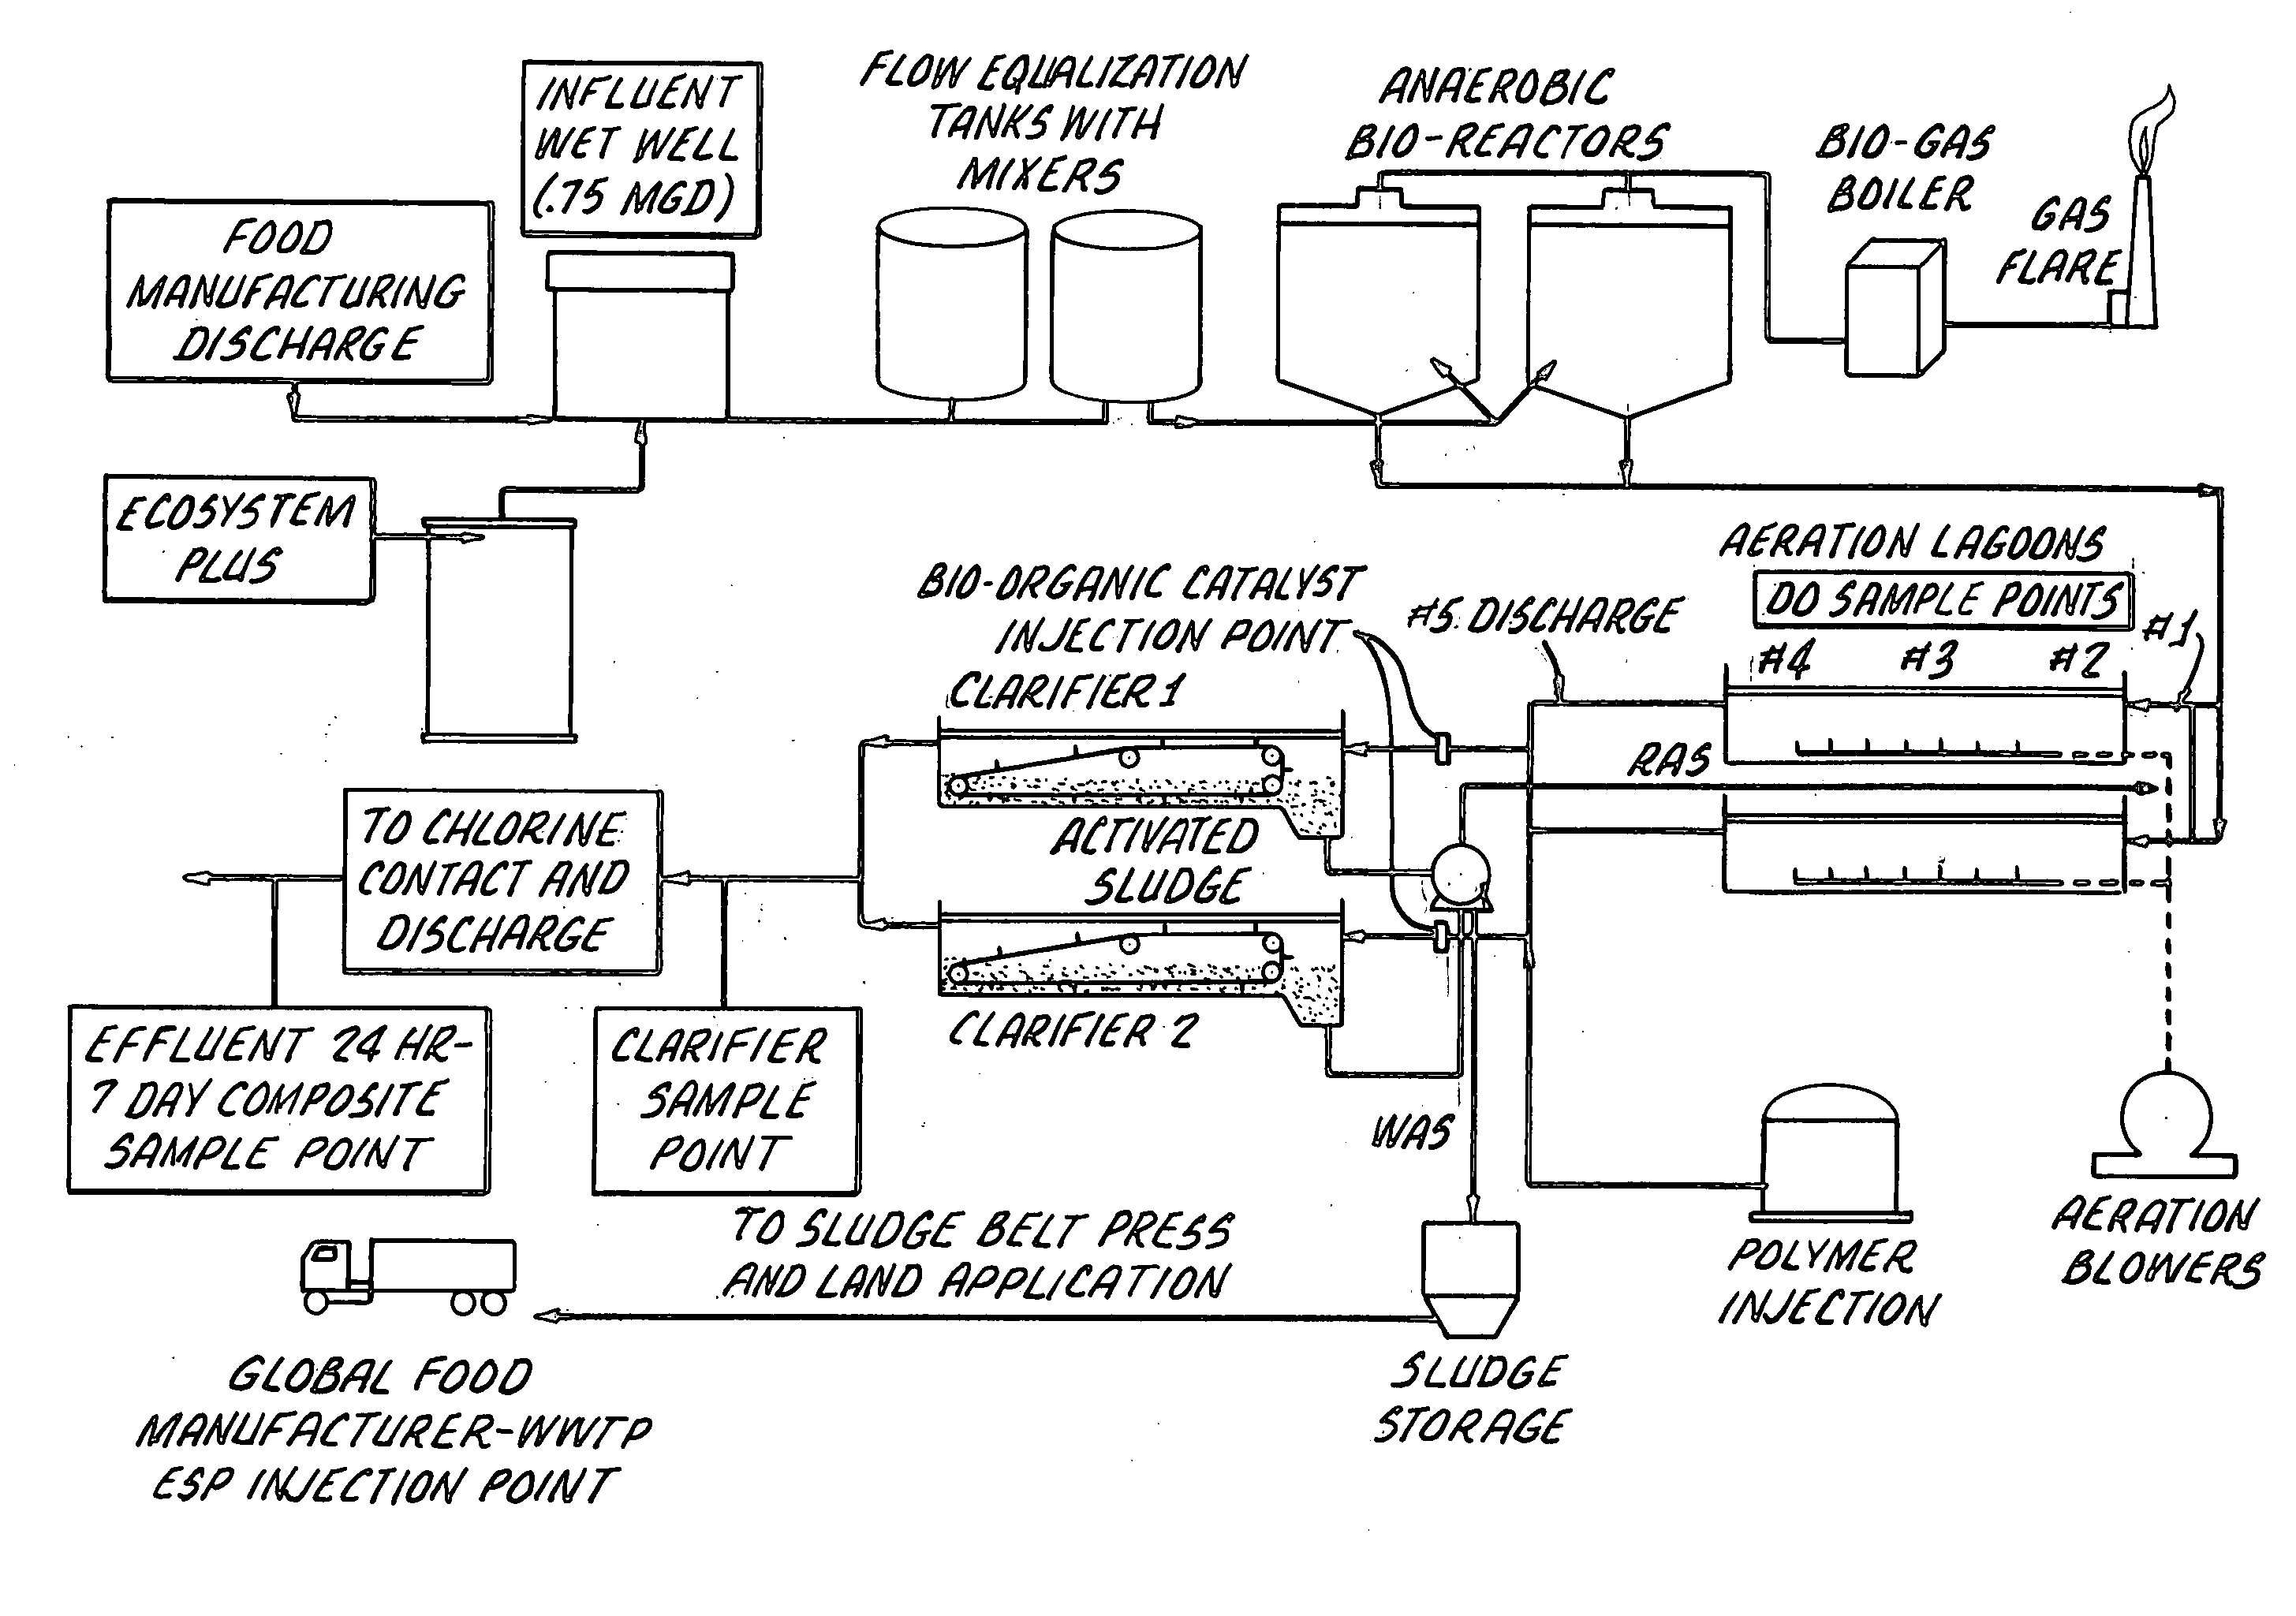 Anaerobic process for treating organic material to generate biogas